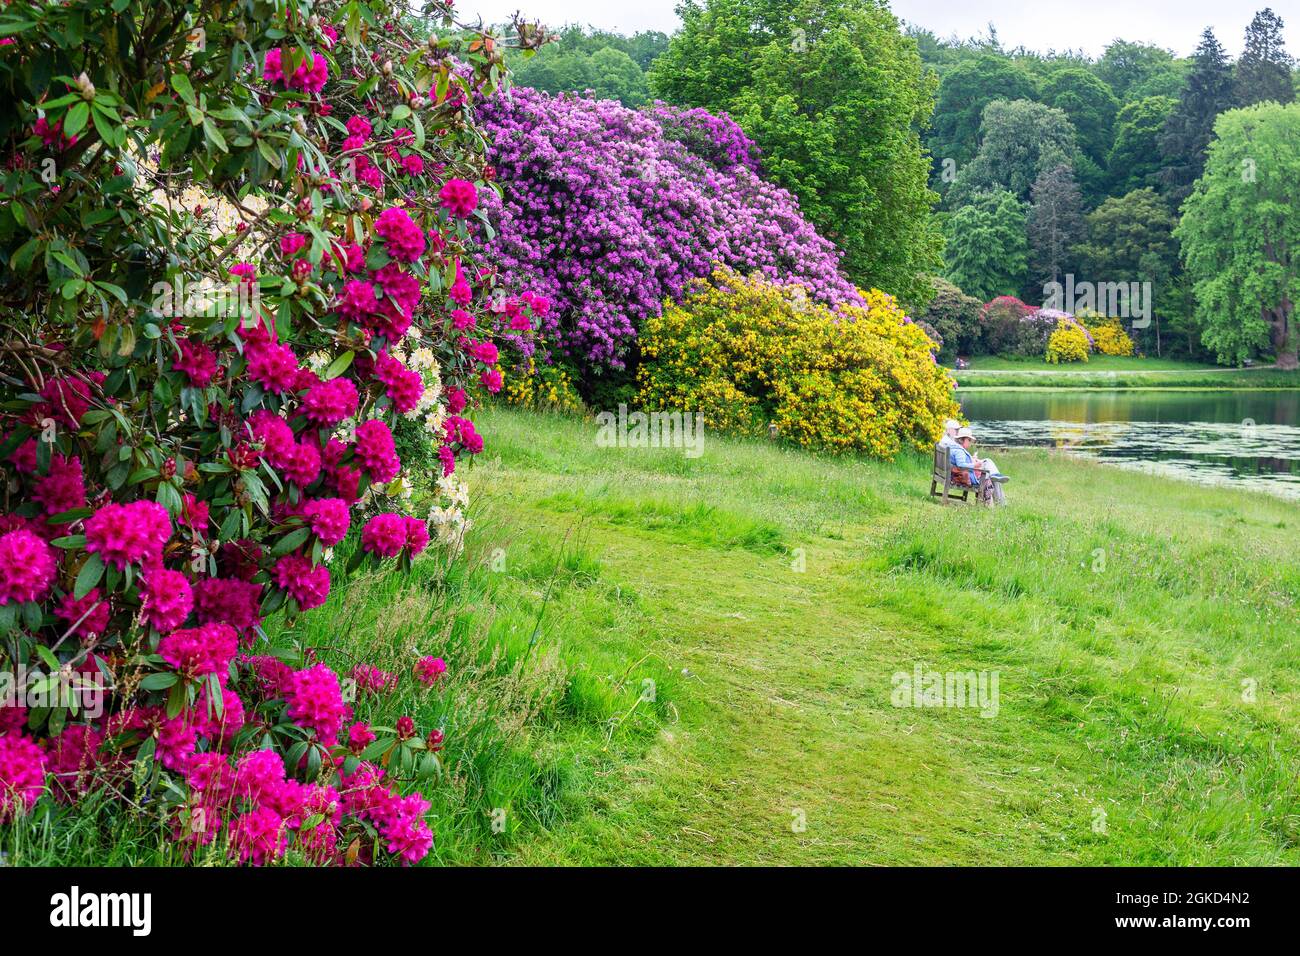 Two elderlly visitors admiring the view acros the lake and colourful rhododendrons at Stourhead Gardens, Wiltshire, England, UK Stock Photo